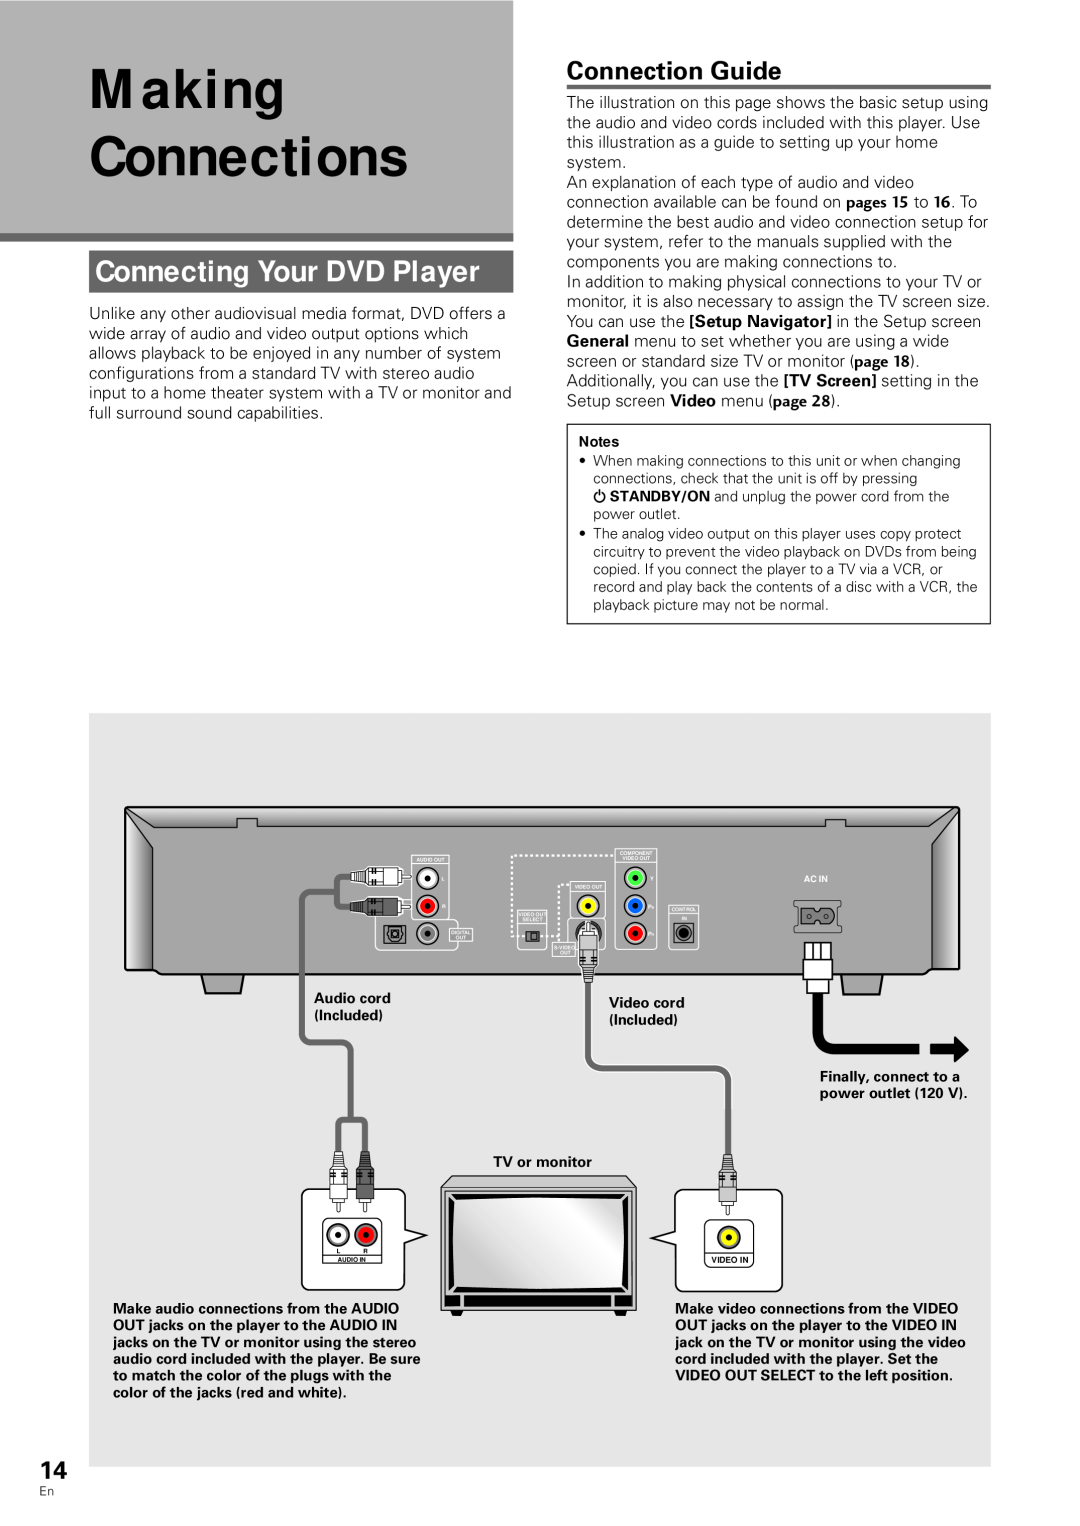 Pioneer DV-343 operating instructions Connecting Your DVD Player, Connection Guide, Making Connections 